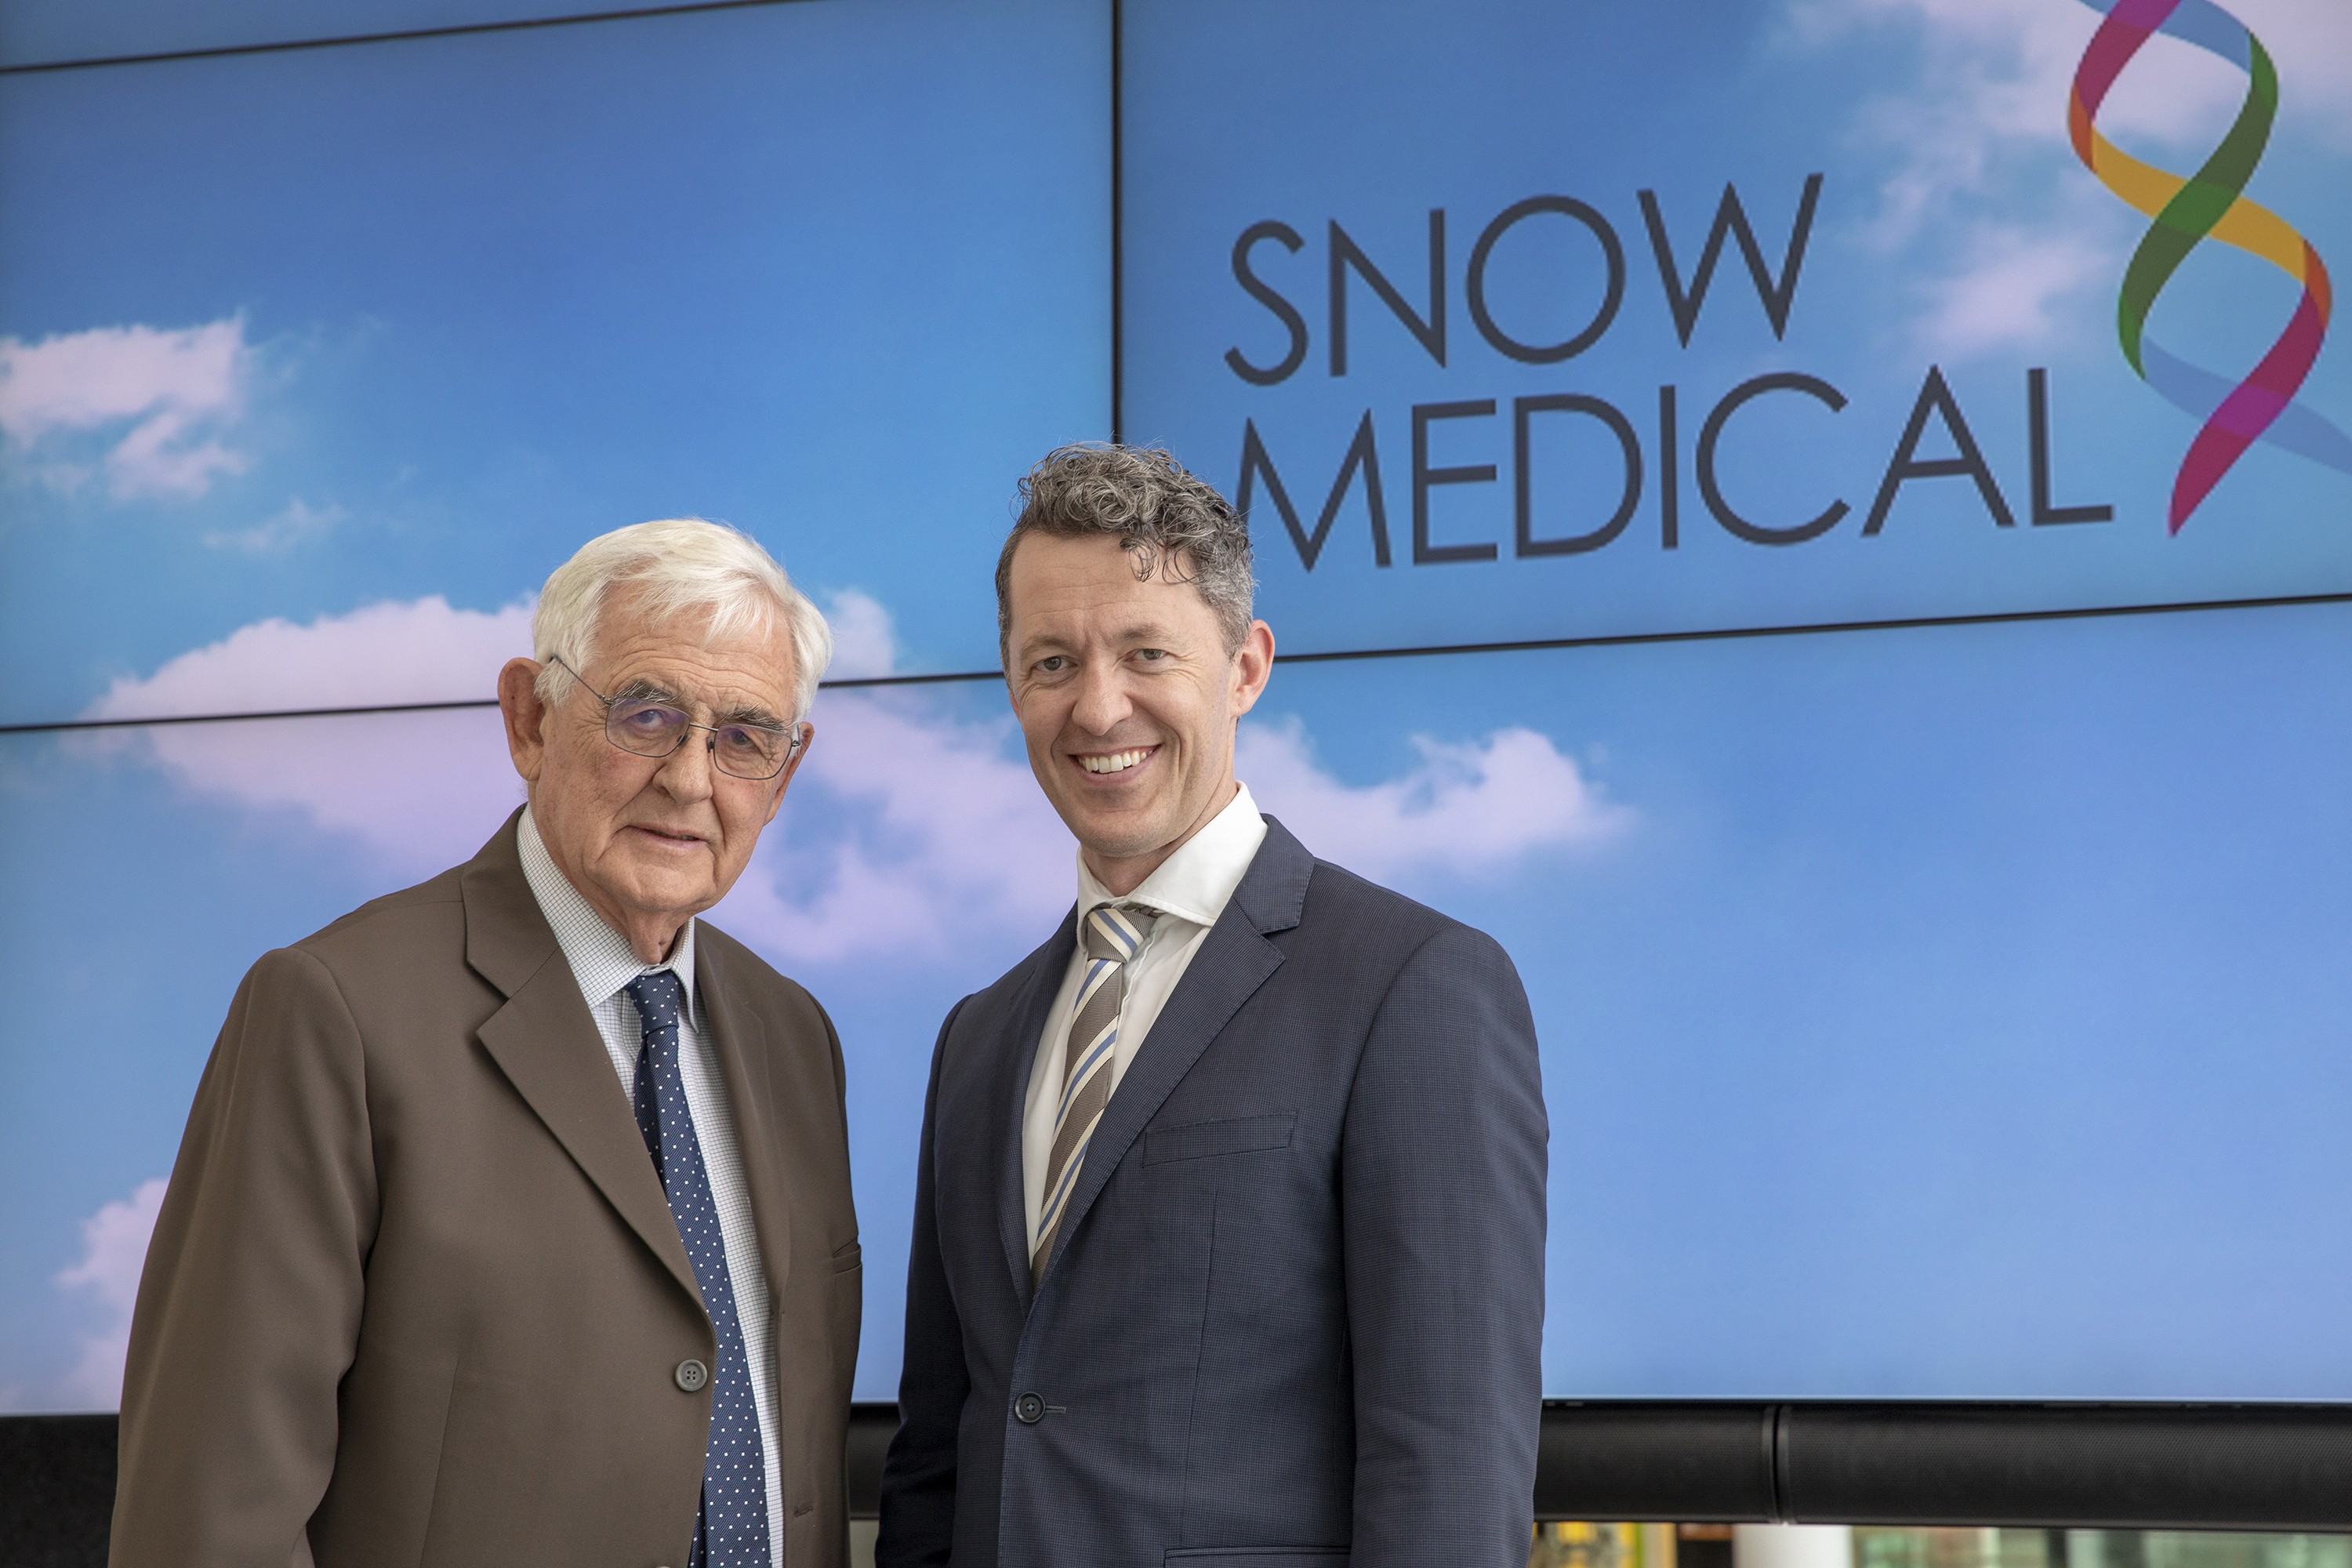 Snow family launches new medical foundation to foster world's best researchers